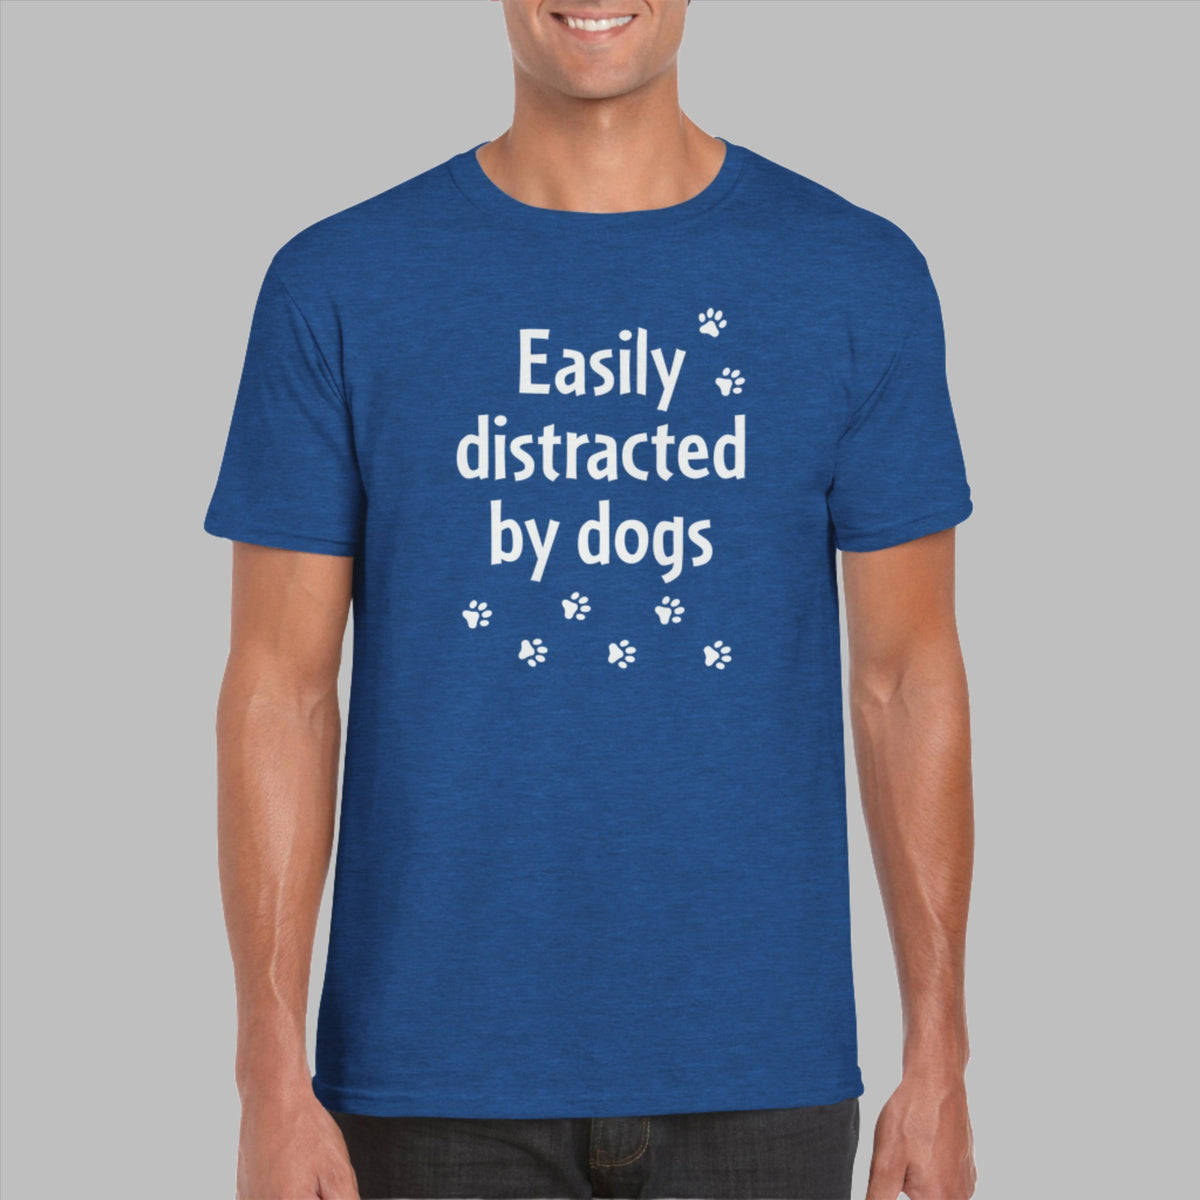 Mens Easily Distracted by Dogs blue heather t shirt - MangoBap